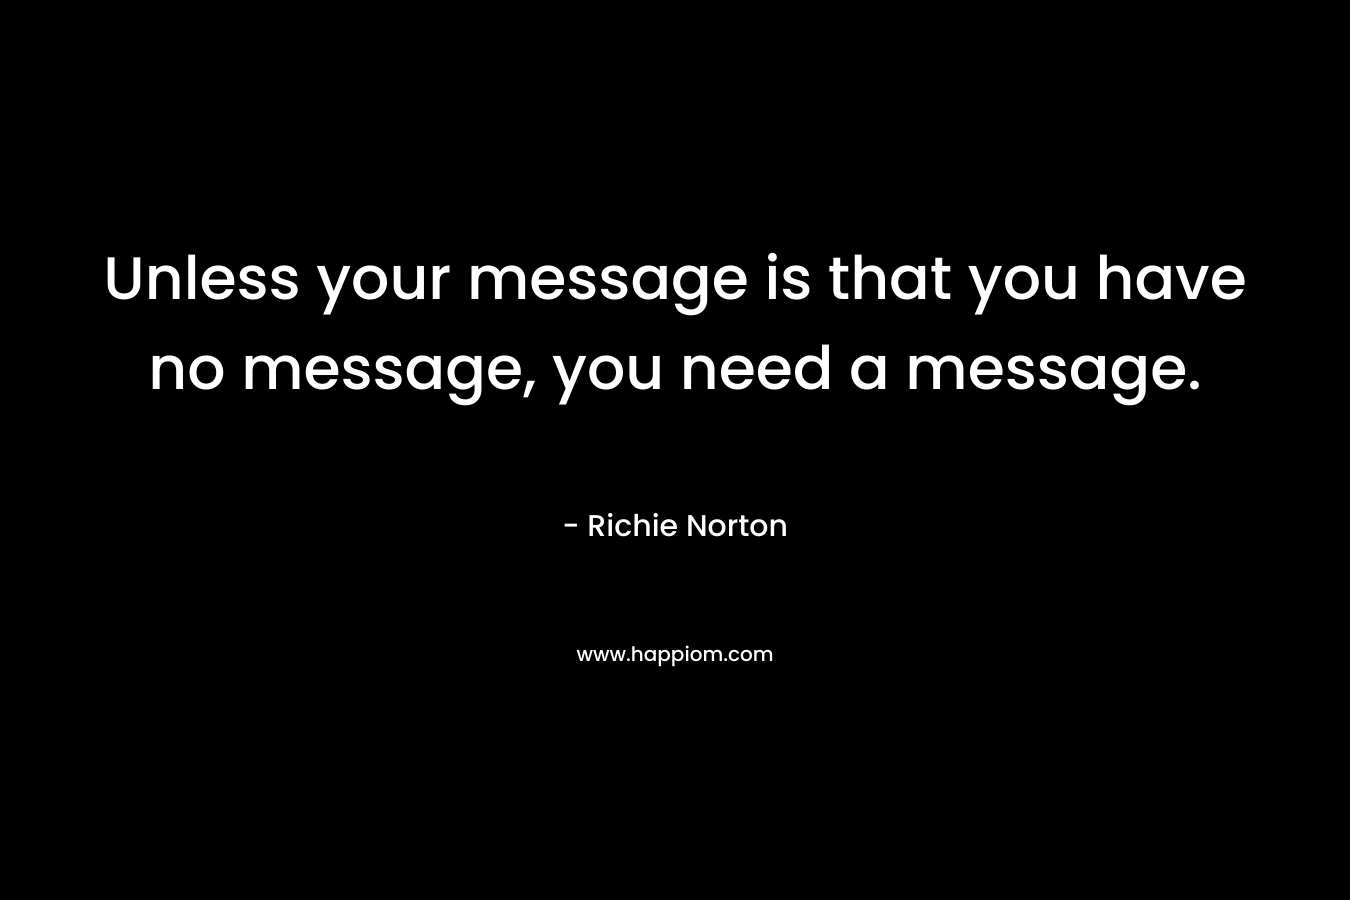 Unless your message is that you have no message, you need a message.